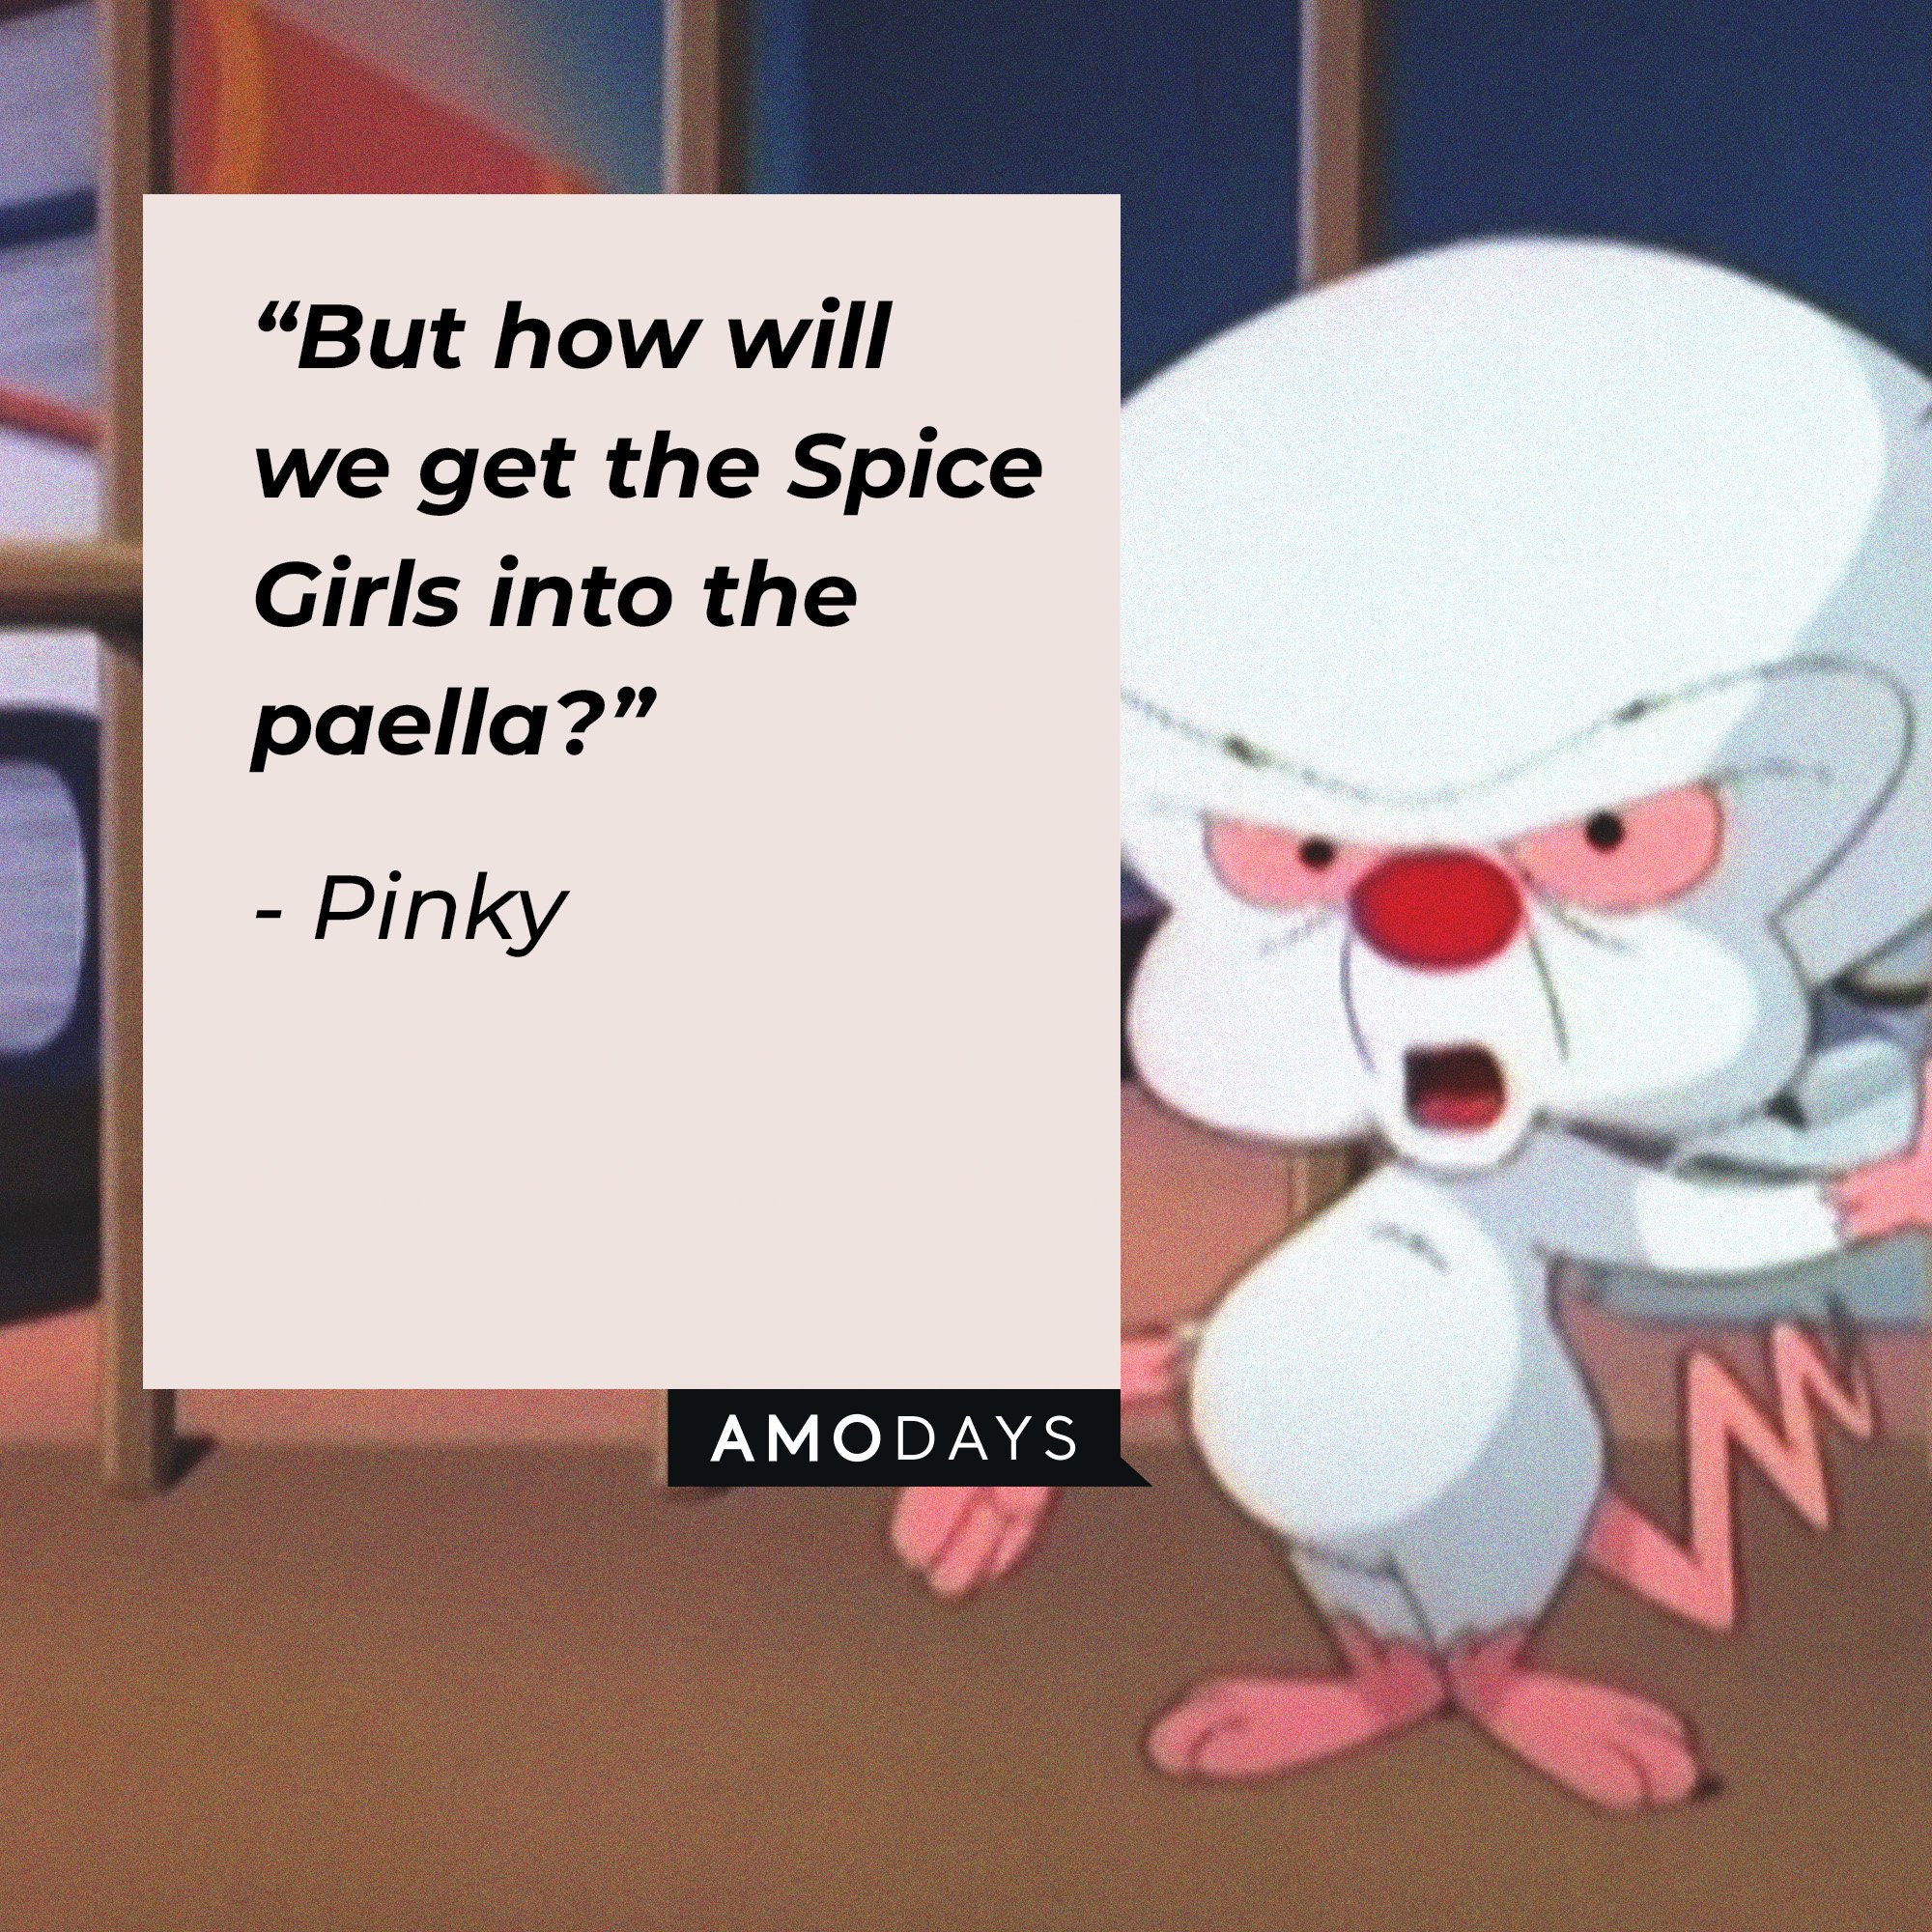  Pinky's quote: “But how will we get the Spice Girls into the paella?” | Image: AmoDays